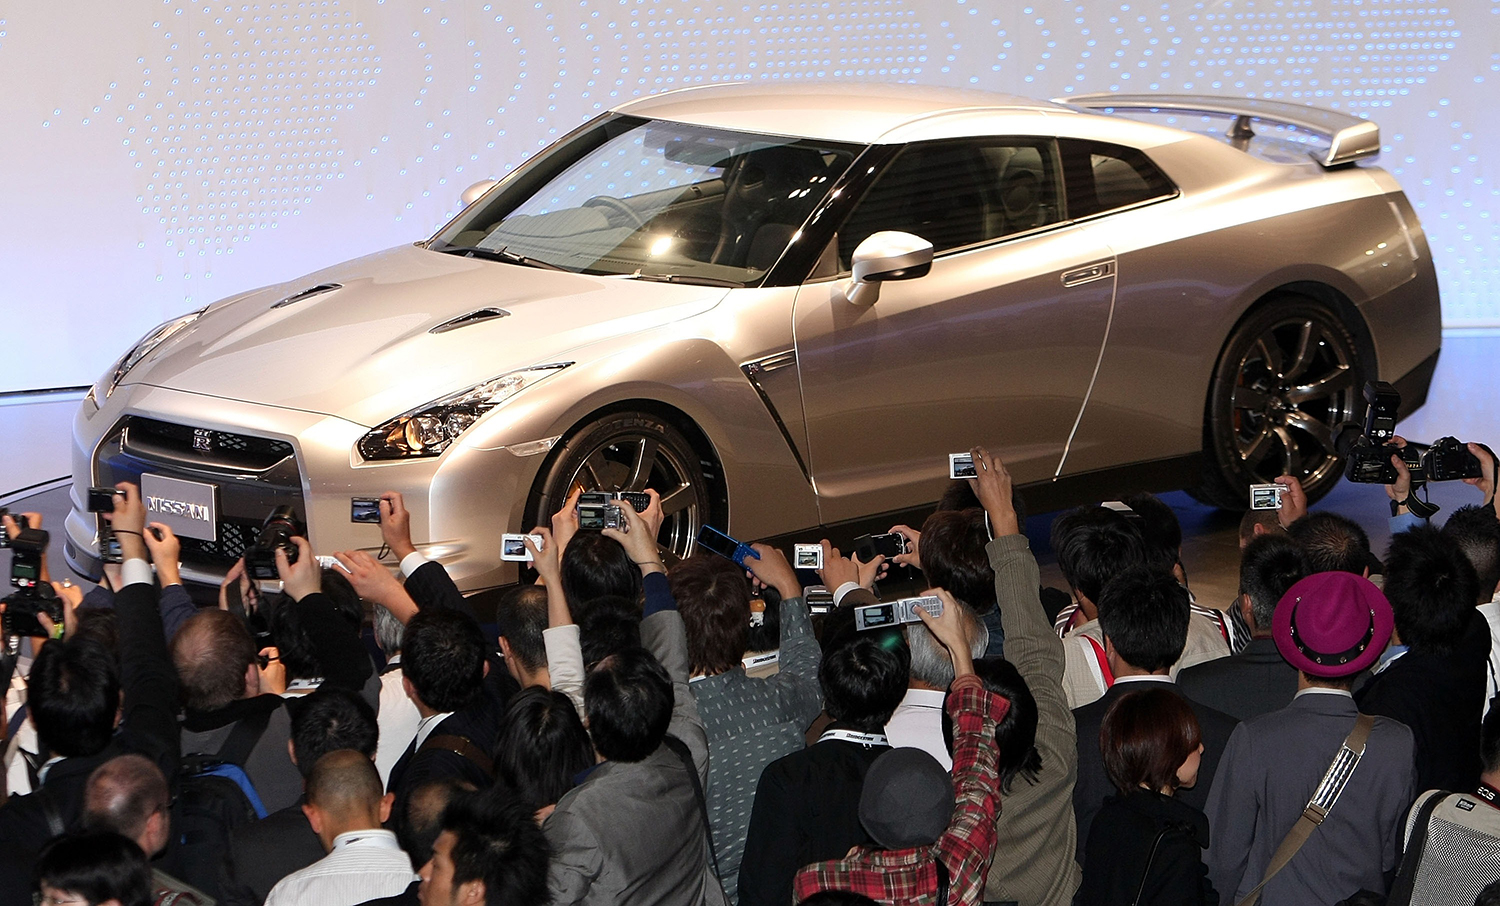 People attending the Tokyo Motor Show in 2007 raise their cameras to take photos of the new Nissan GT-R R35, which is today an overlooked sports car with supercar power